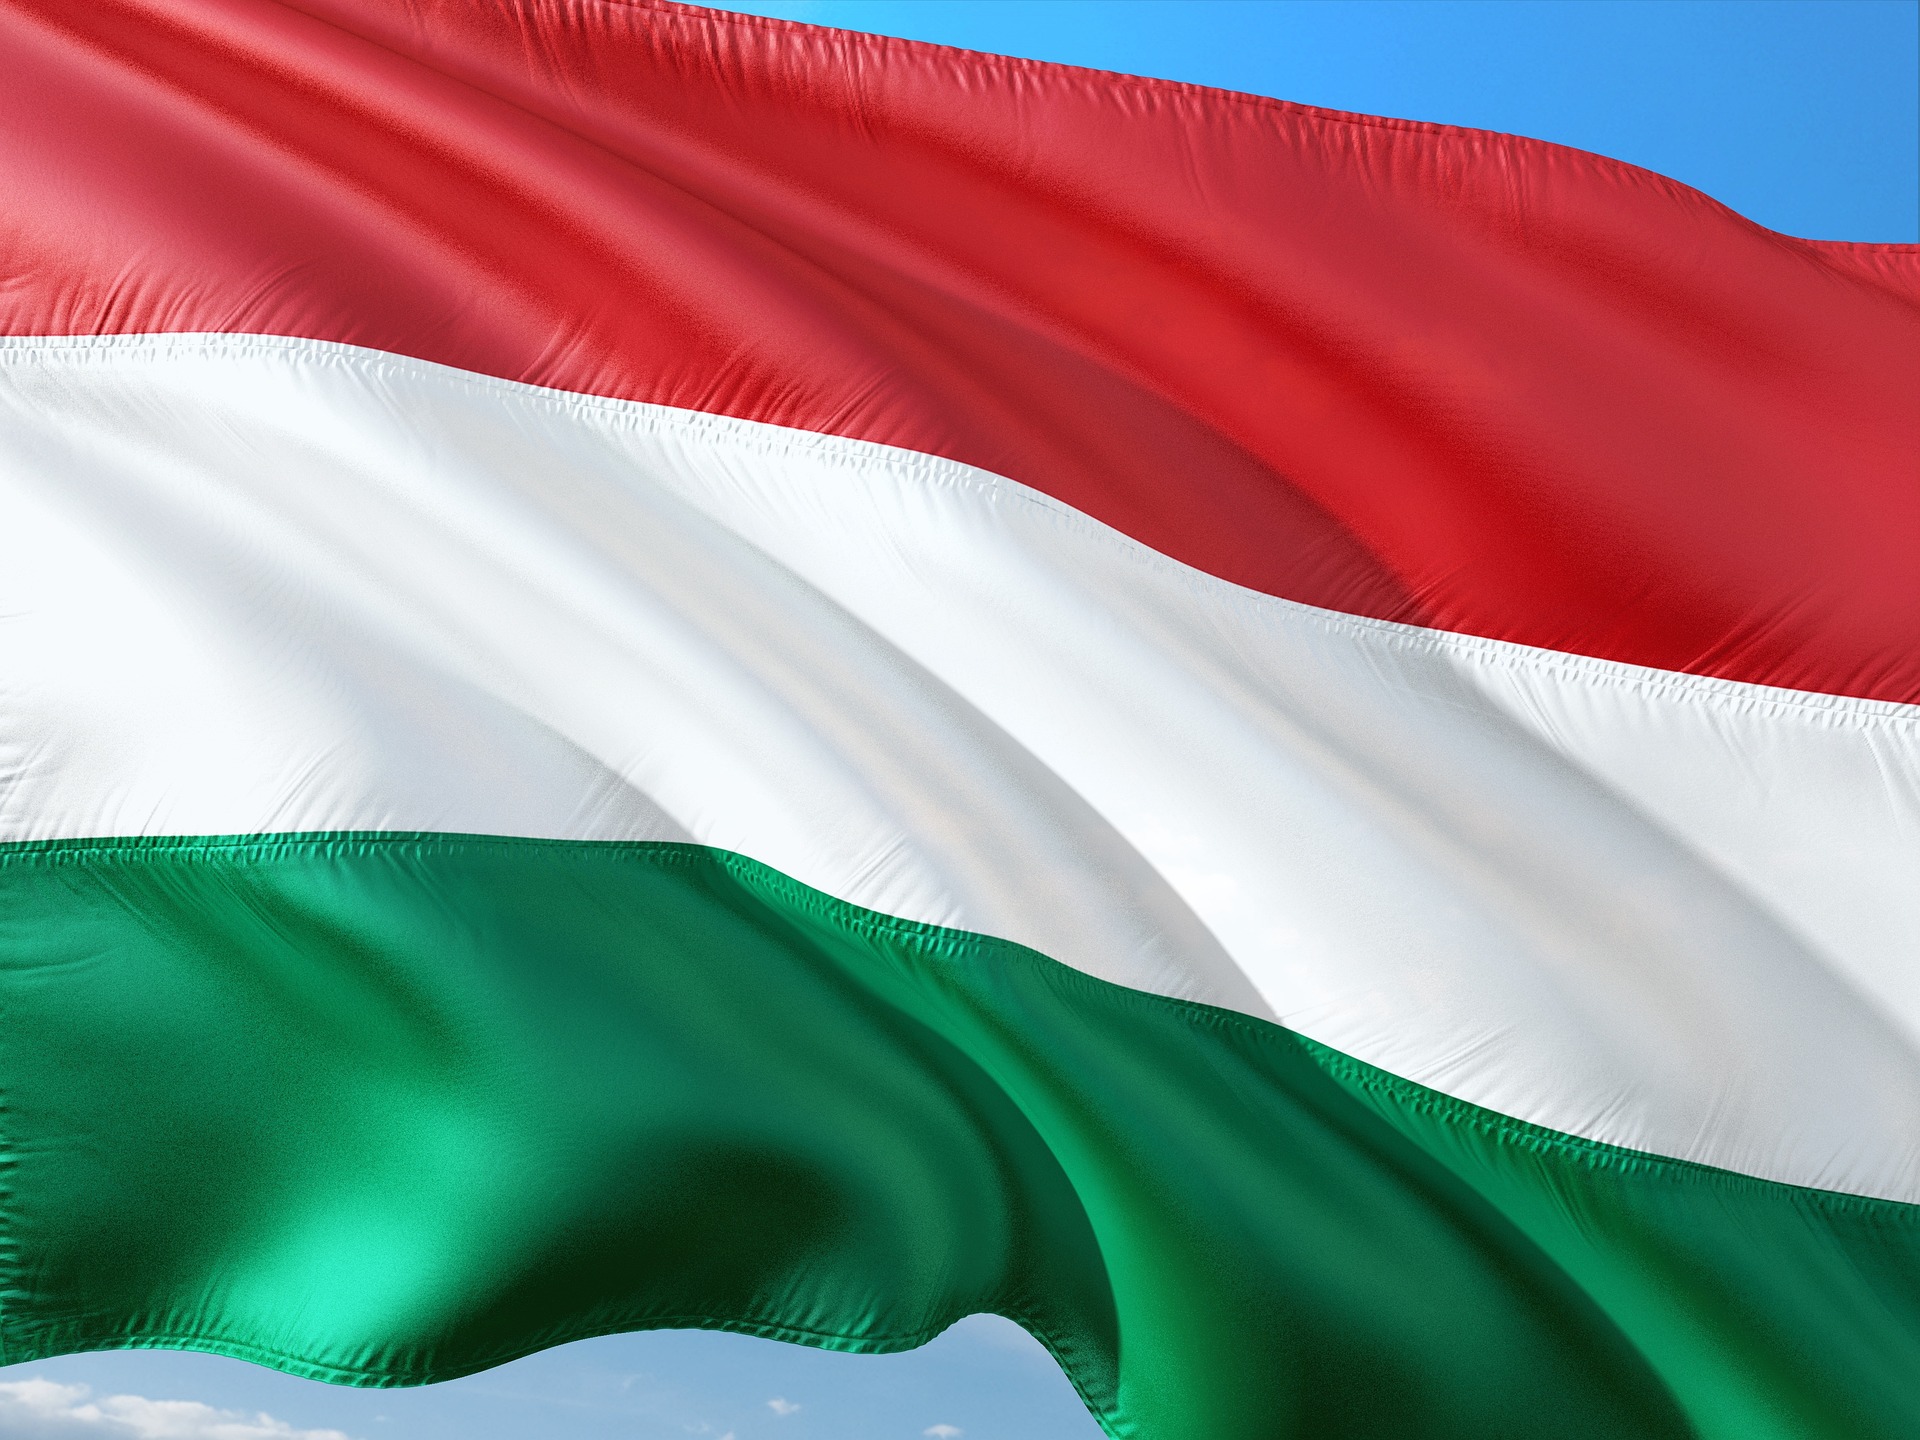 Hungary receives threat from EU leaders to ‘politically rape’ them